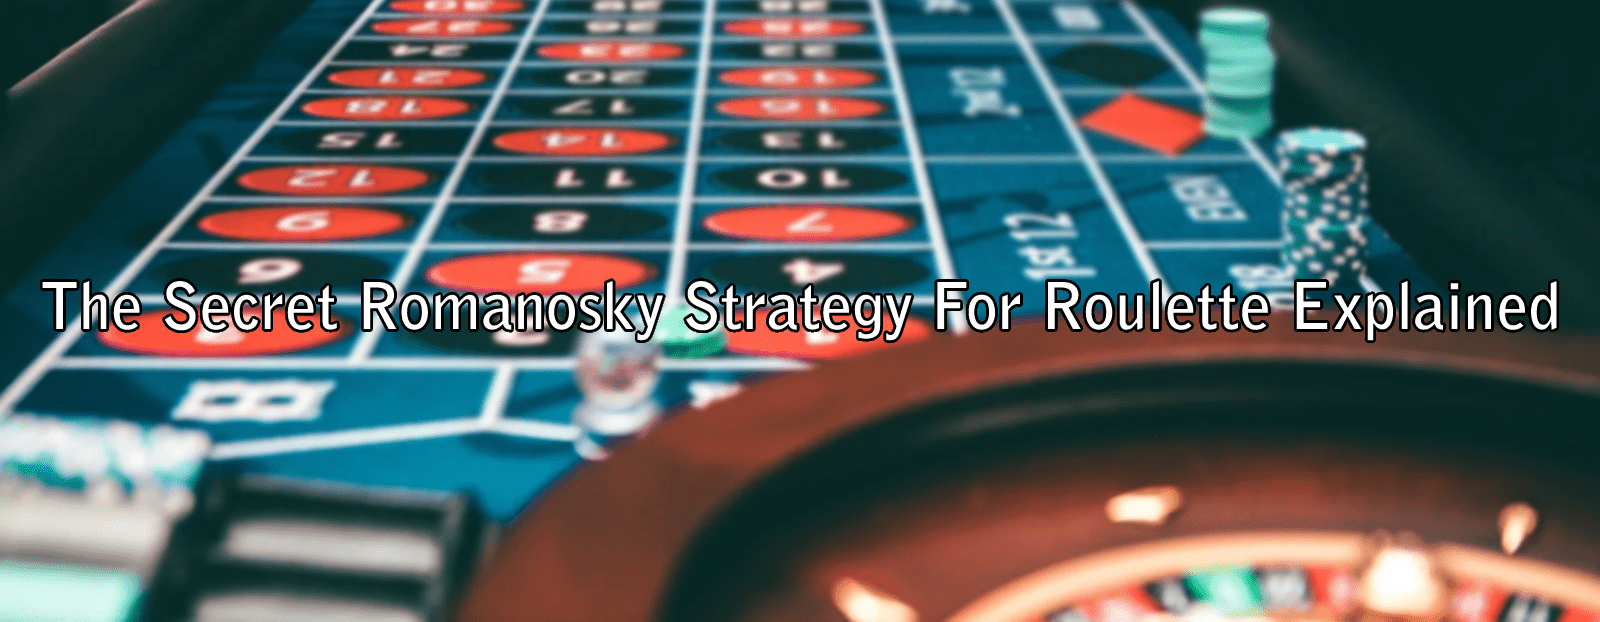 The Secret Romanosky Strategy For Roulette Explained